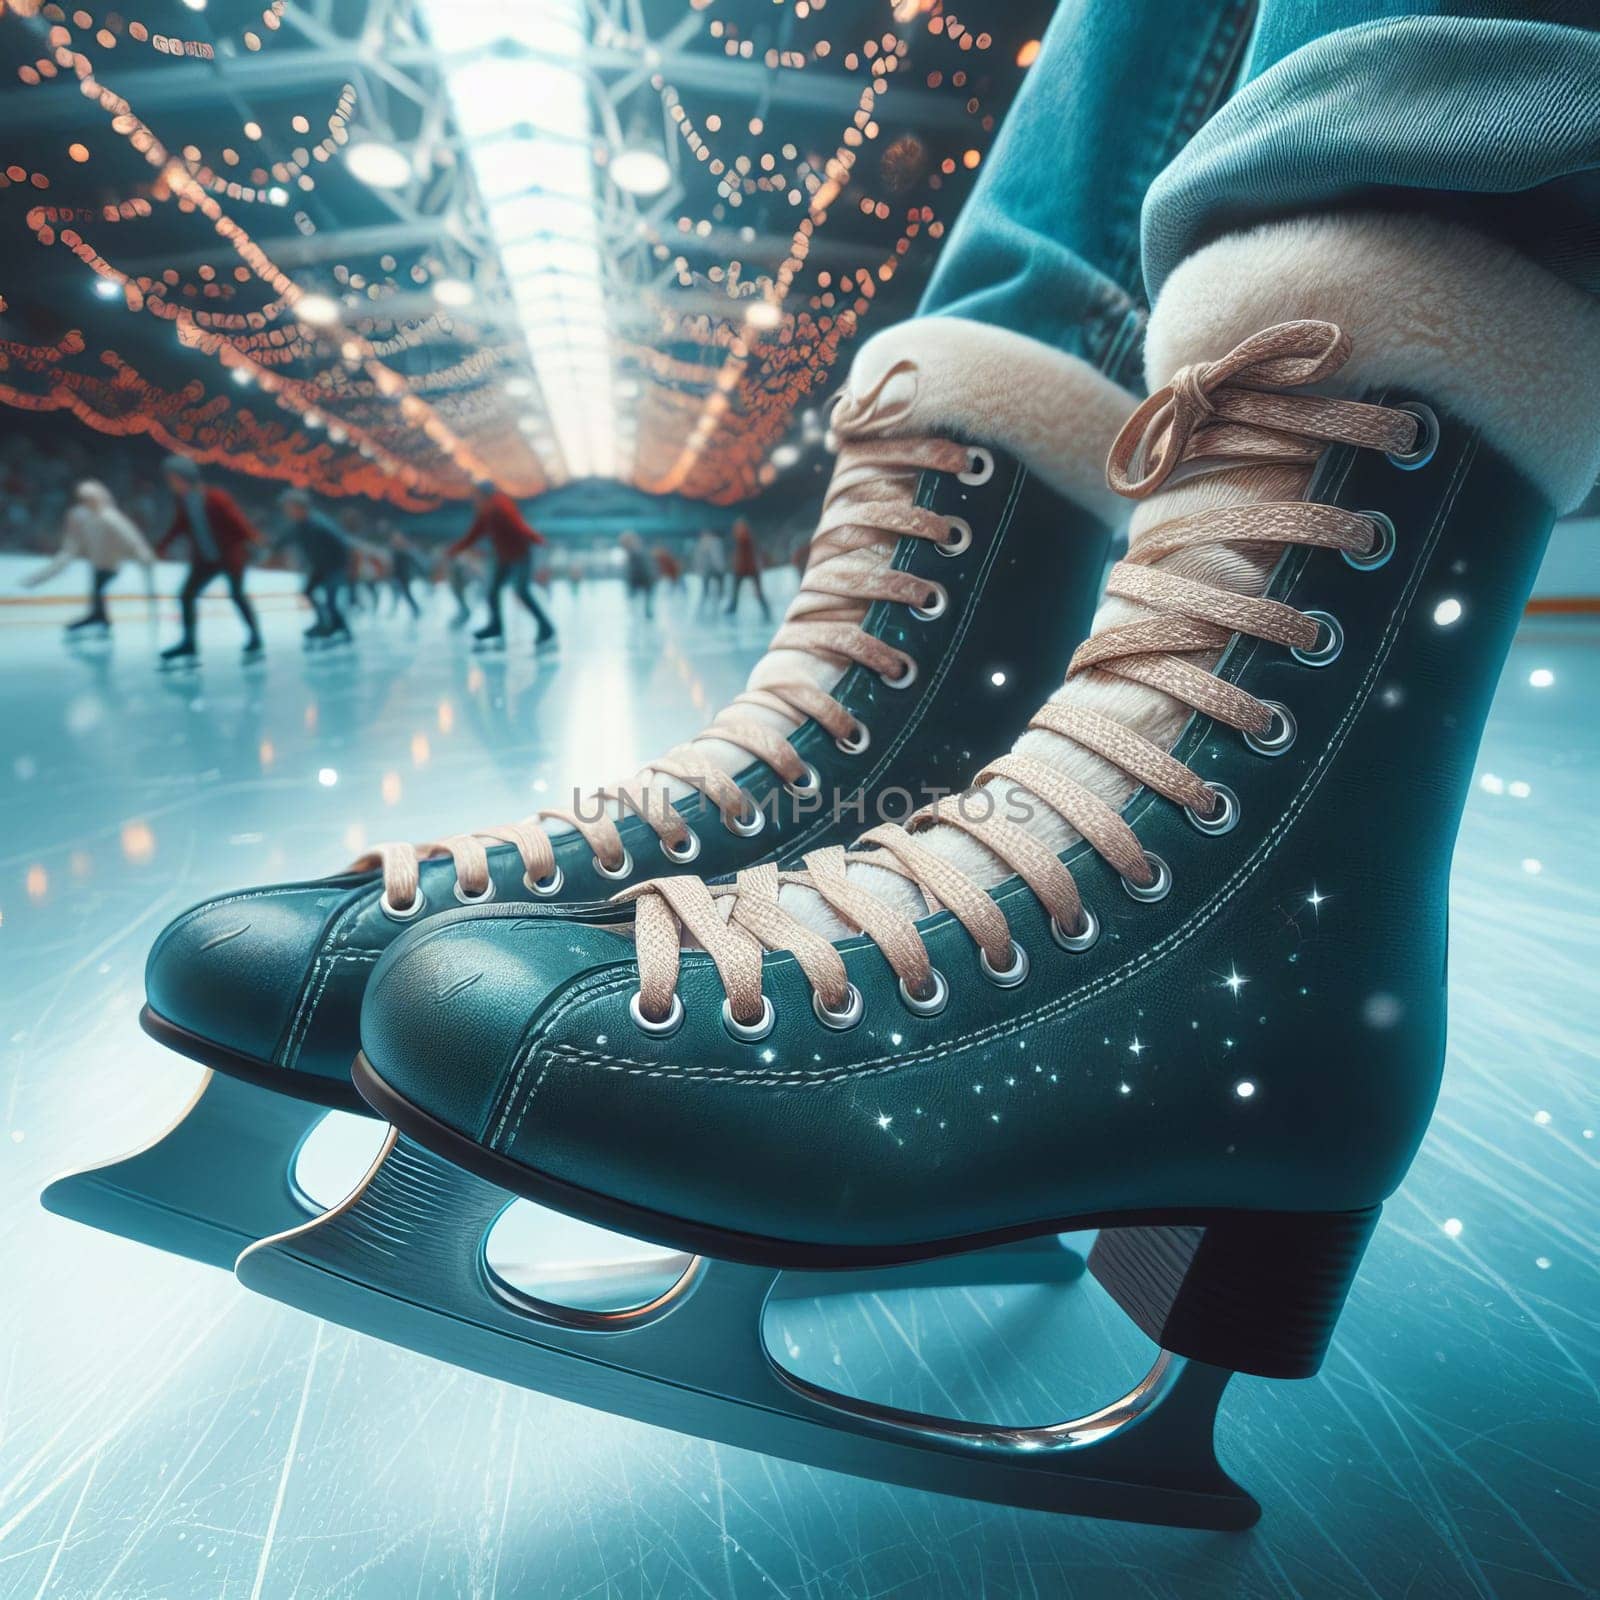 Close-up of a pair of ice skates, with the blurred background revealing an ice rink and people enjoying their skate